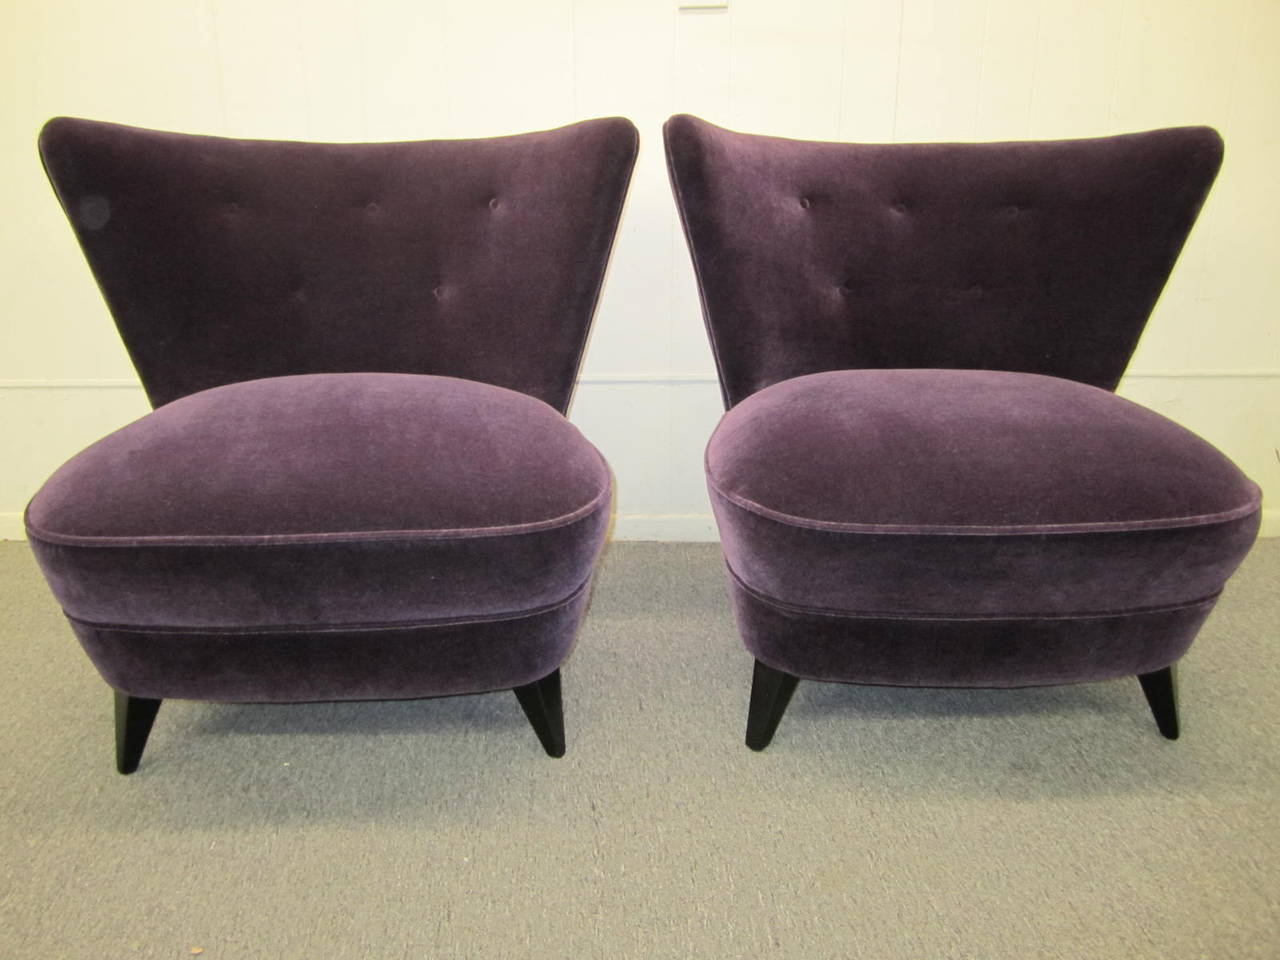 Stunning pair of Gilbert Rhode wing back slipper chairs.  These chairs have been totally restored with gorgeous high end vintage purple mohair,new foam, and freshly ebonized legs.  Super high style and extremely comfortable. The newly upholstered